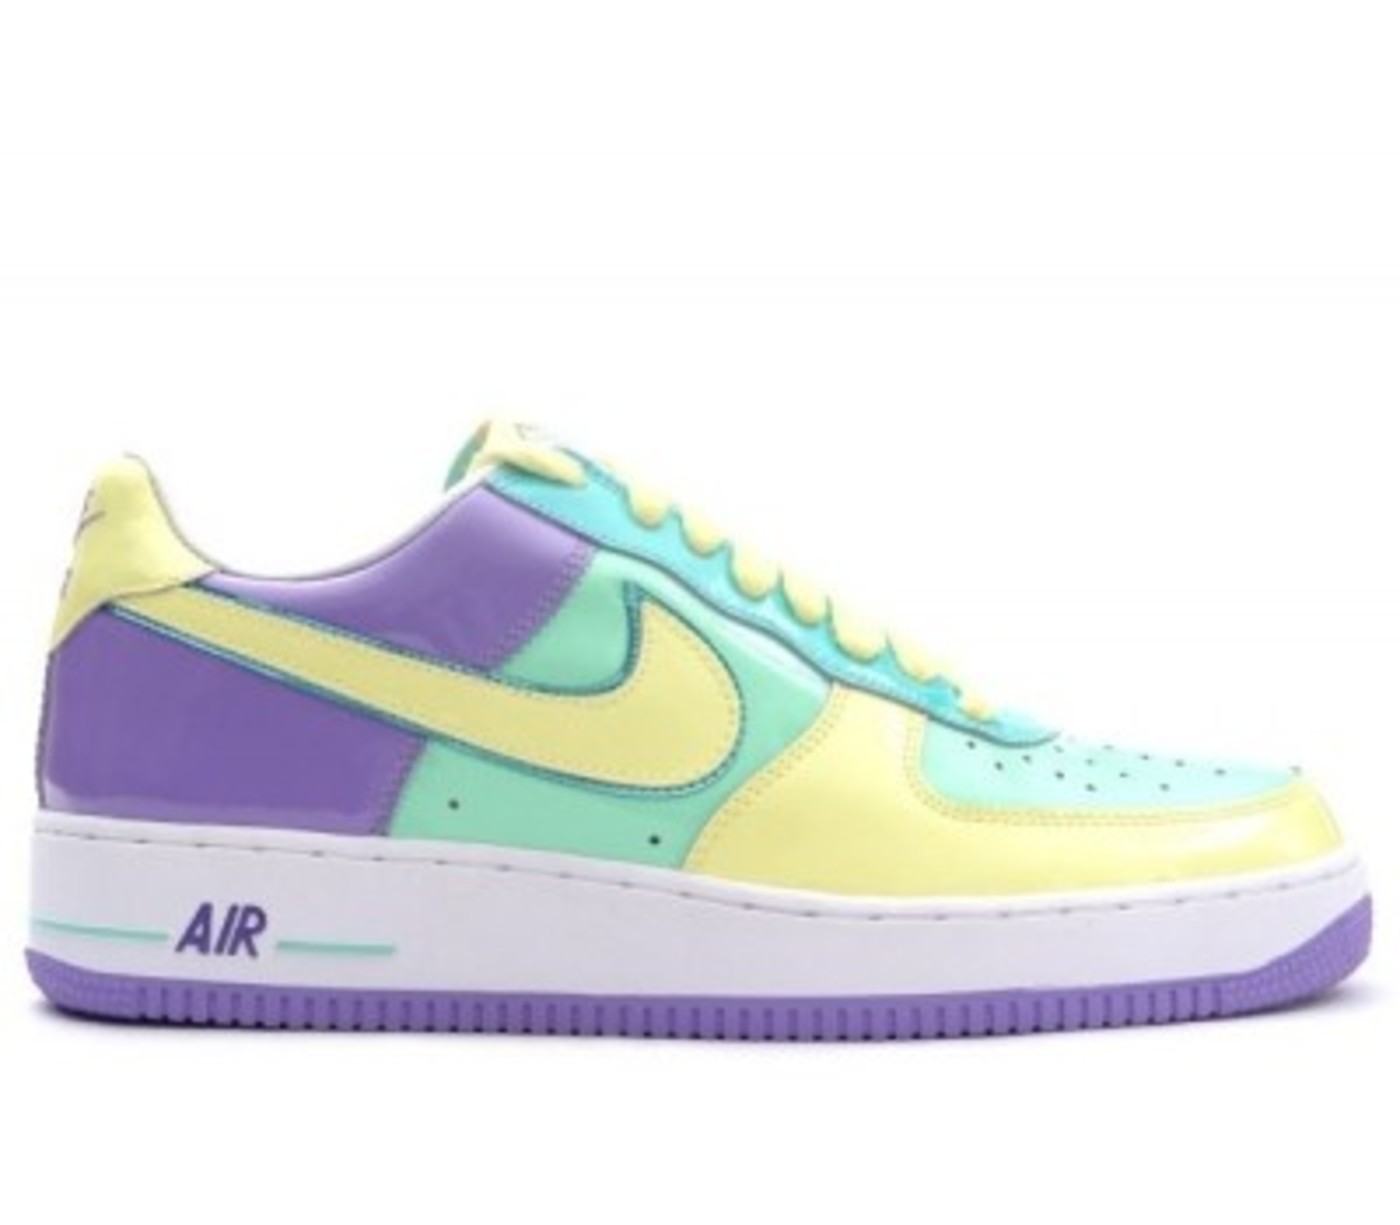 Kicks Deals Deal of the Day Nike Air Force 1 Premium “Easter” Complex